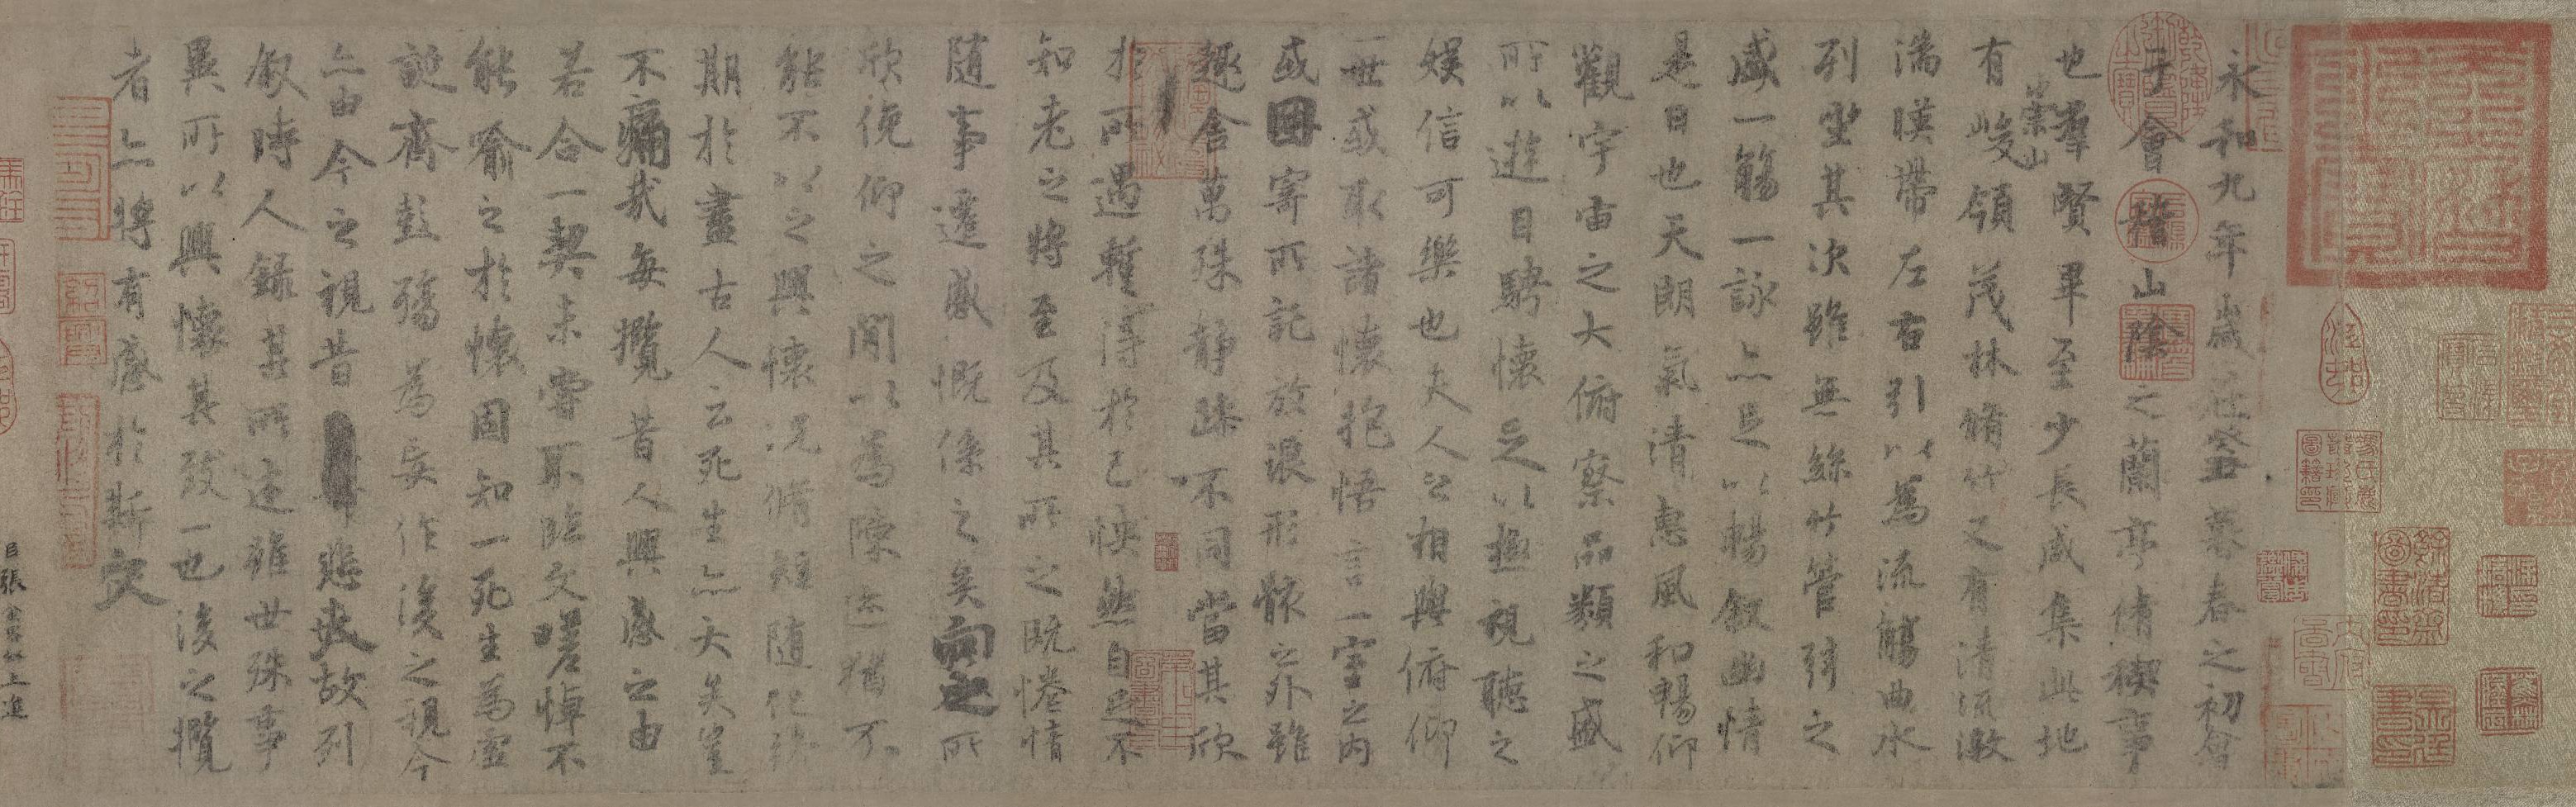 Copy of the Orchid Pavilion Preface in Running Script